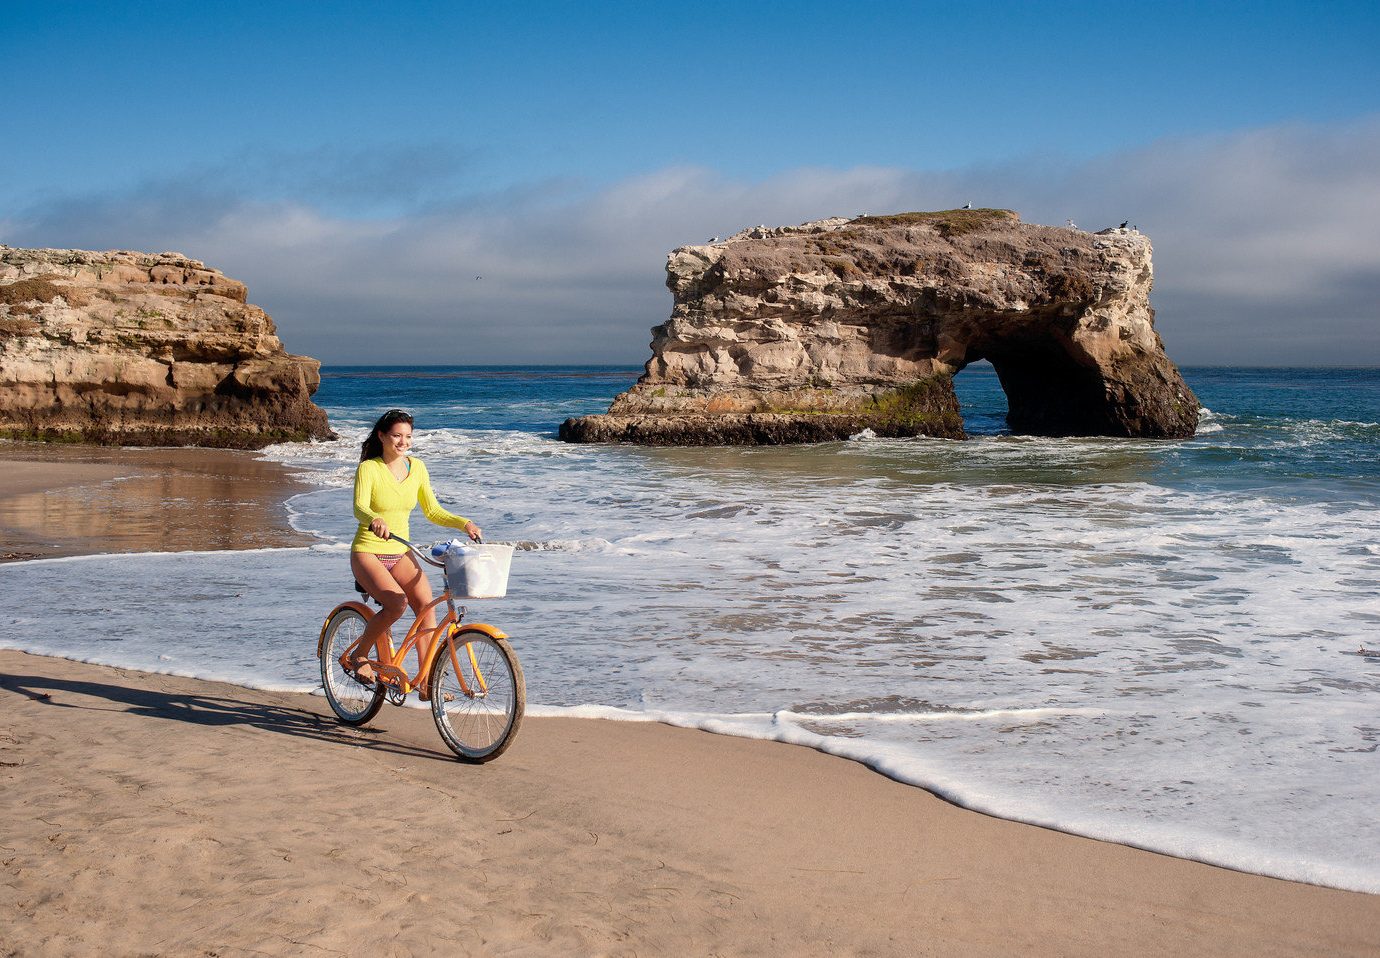 Trip Ideas outdoor sky water ground bicycle rock Beach Coast Sea body of water shore Ocean vacation vehicle Nature cape sand cliff bay wave terrain sandy